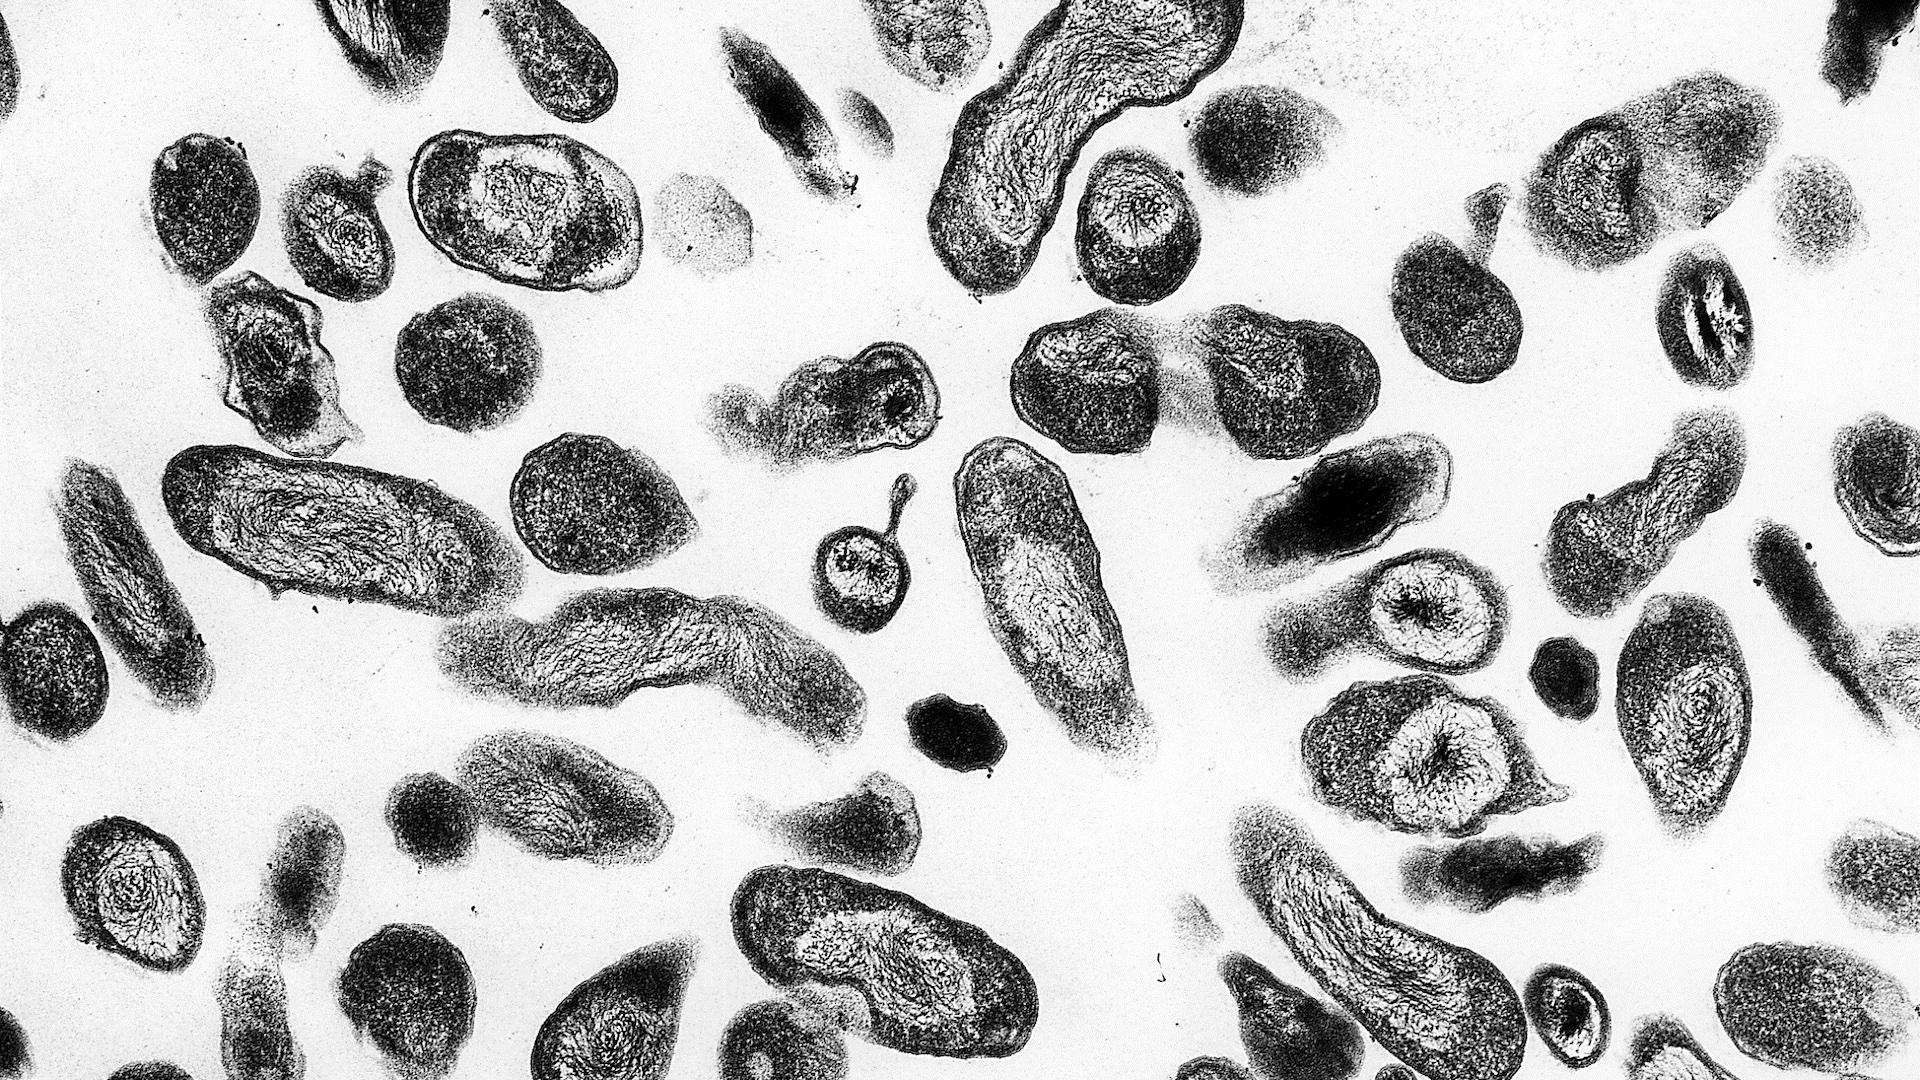 Black and white image of Coxiella burnetii bacteria; the cells appear round or oval-shaped with a dark membrane and lighter insides